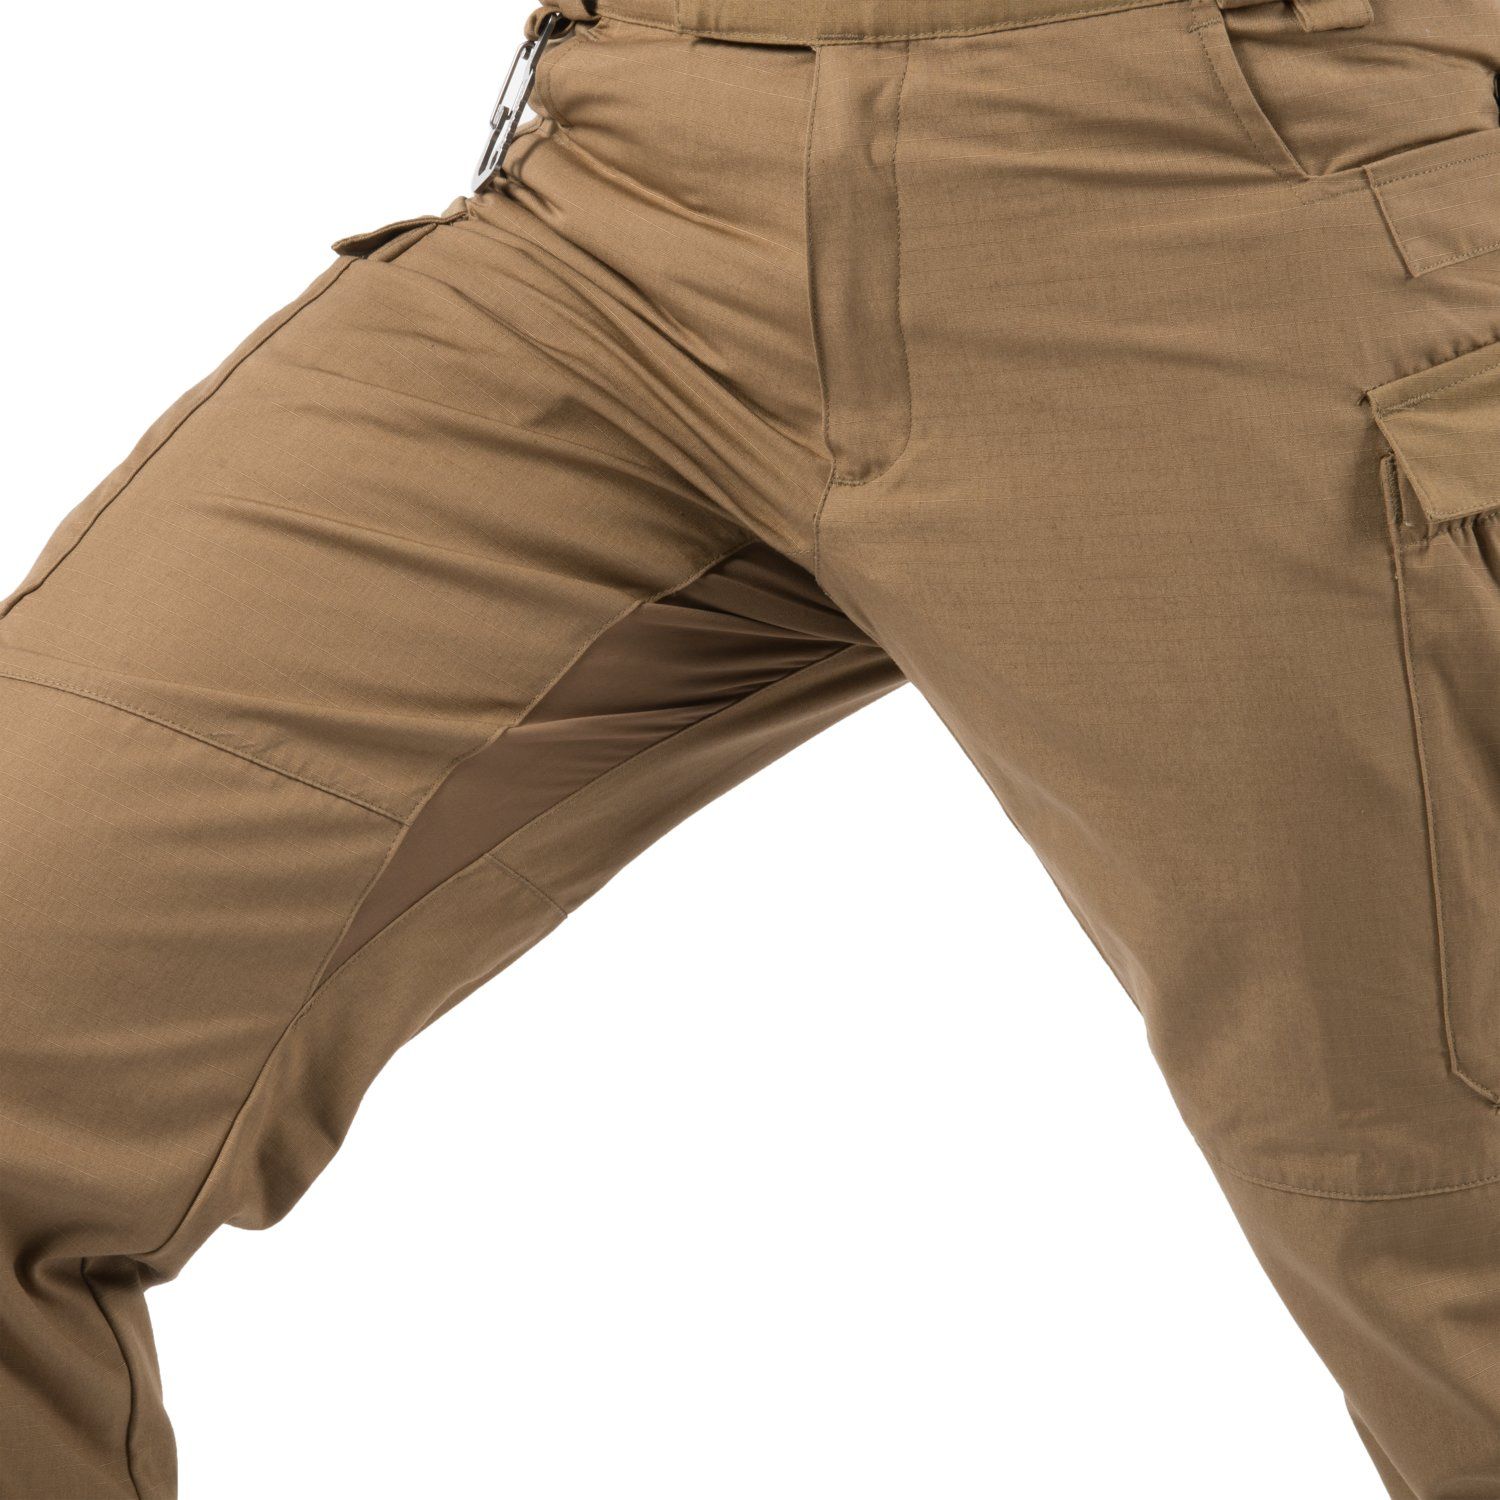 MBDU® Trousers - Nyco Ripstop - Multicam® Black - Helikon